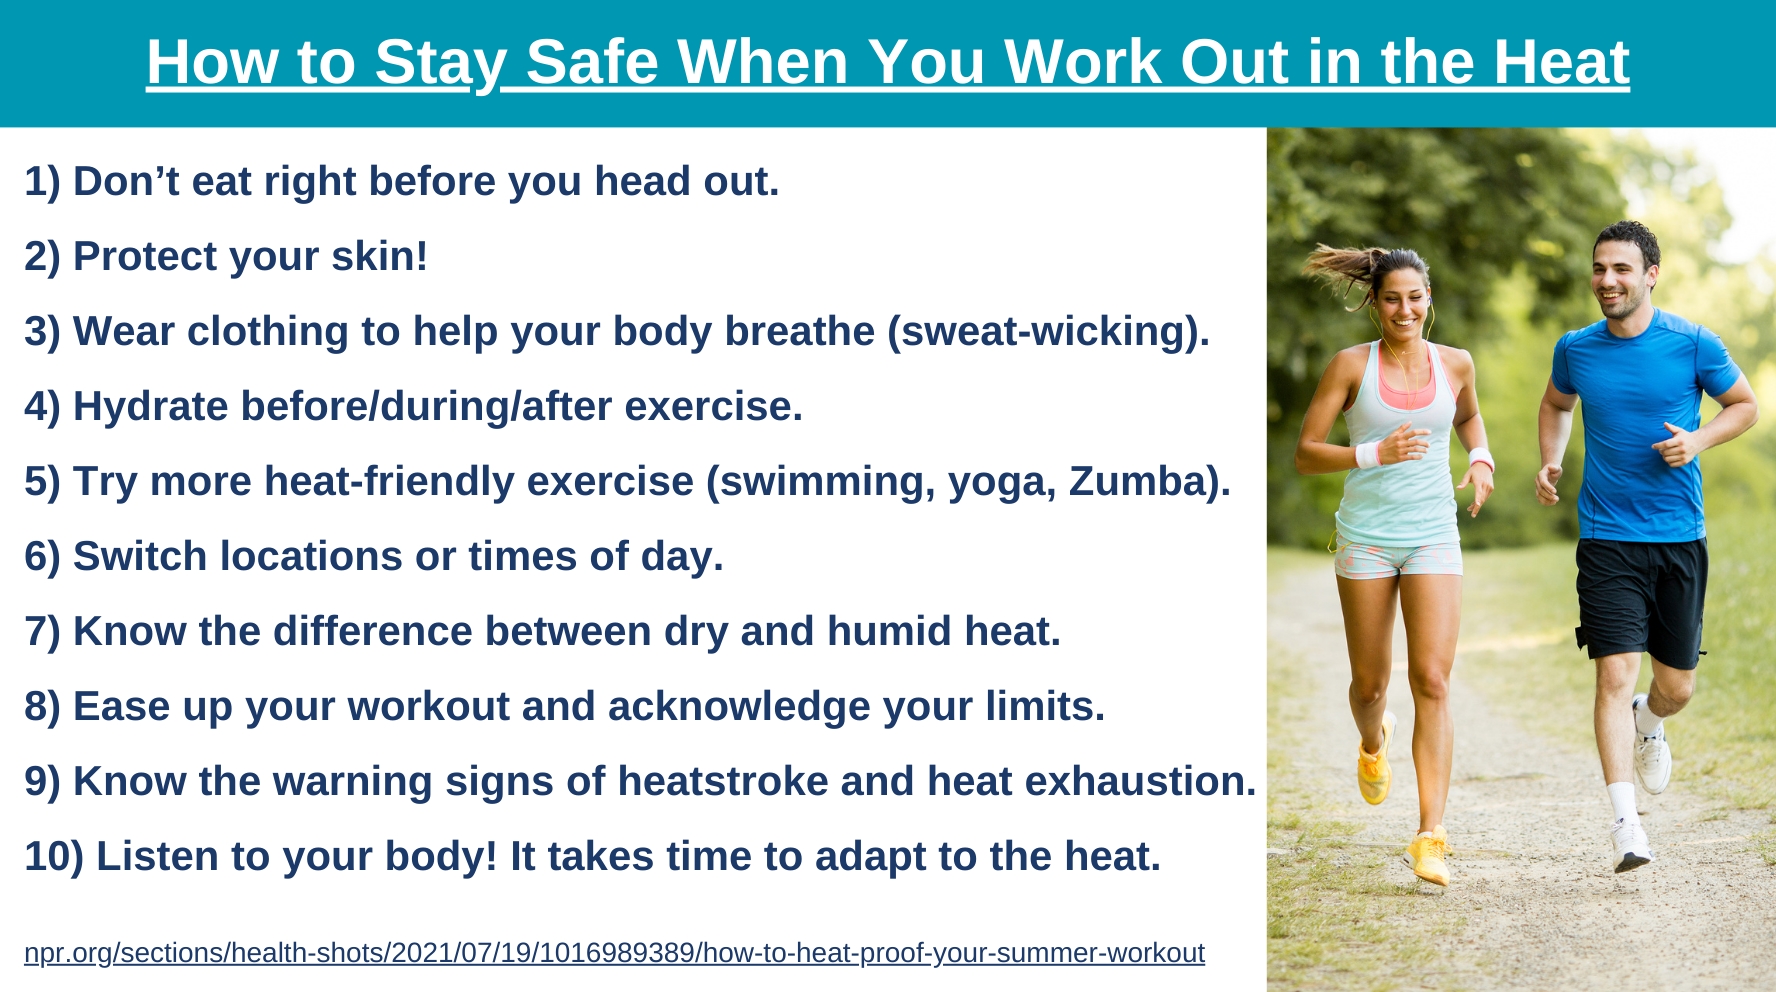 Stay safe in the heat